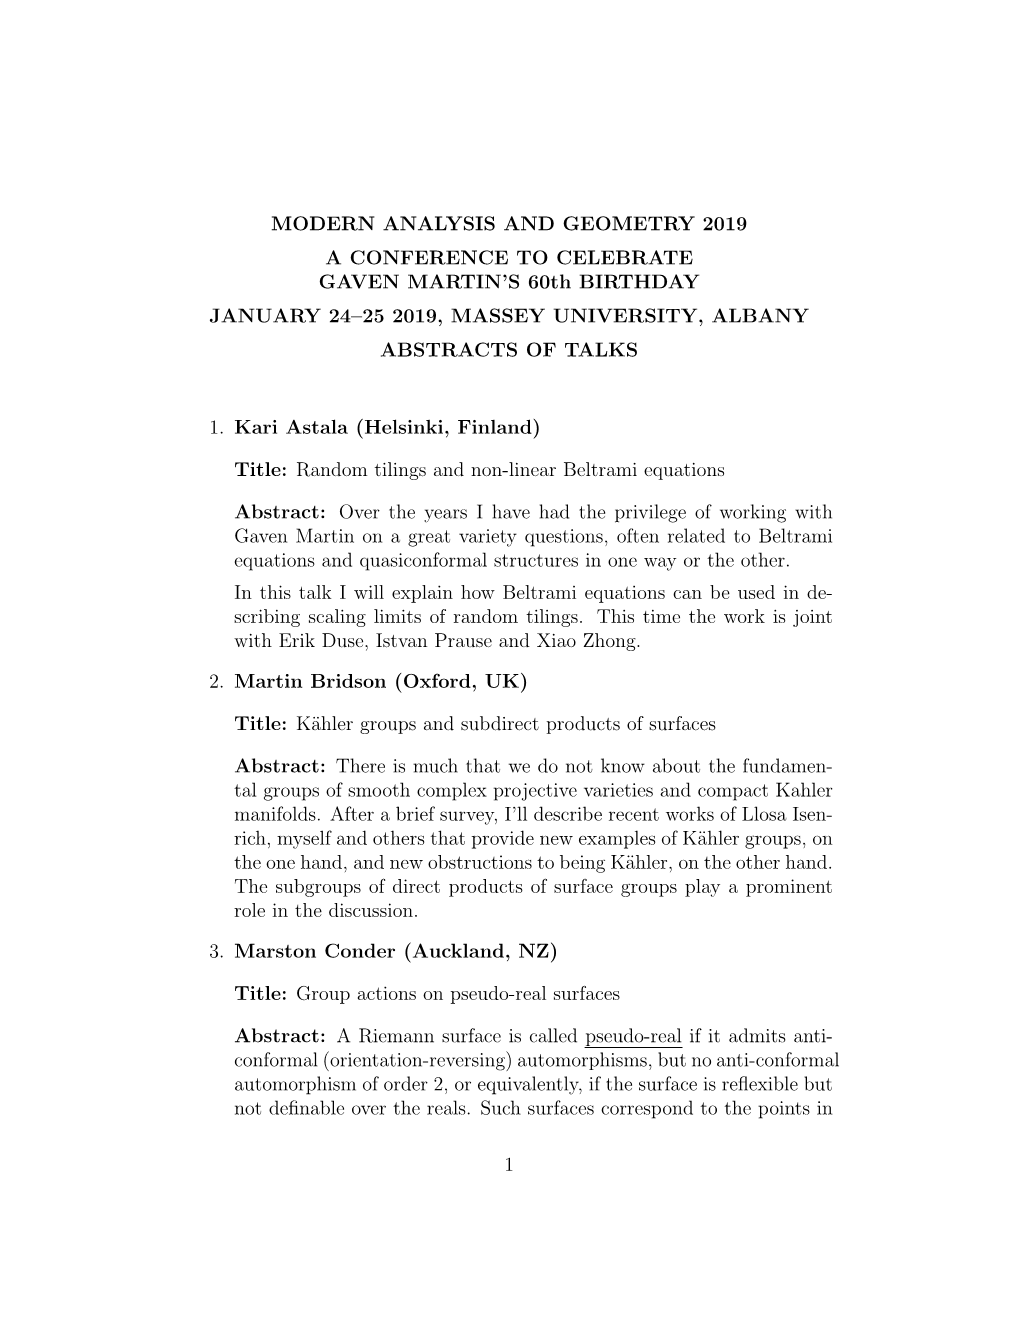 MODERN ANALYSIS and GEOMETRY 2019 a CONFERENCE to CELEBRATE GAVEN MARTIN’S 60Th BIRTHDAY JANUARY 24–25 2019, MASSEY UNIVERSITY, ALBANY ABSTRACTS of TALKS